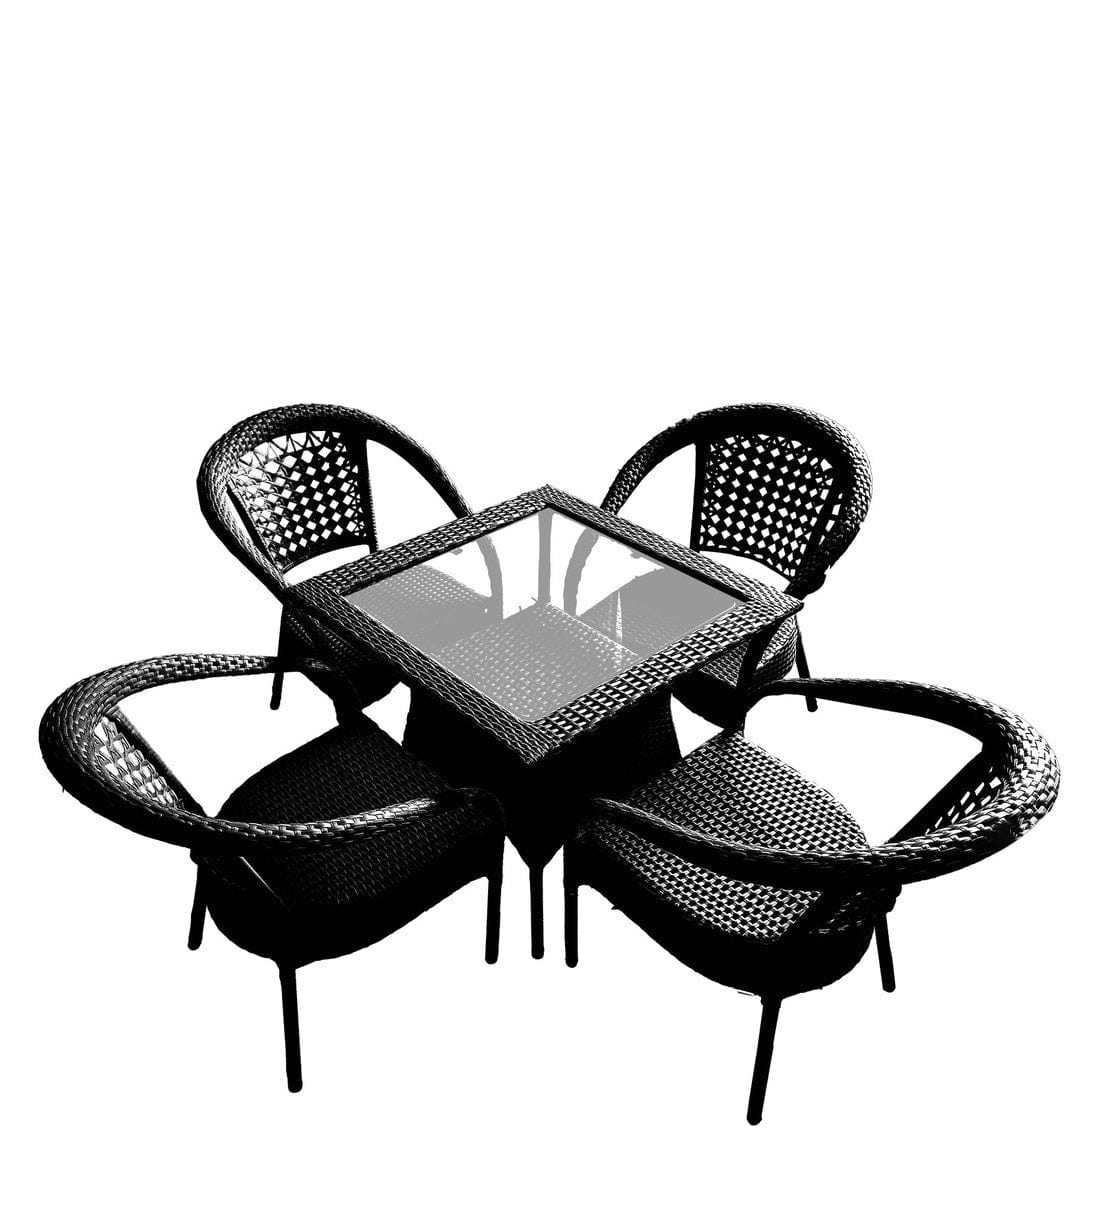 Dreamline Outdoor Furniture Garden Patio Coffee Table Set(1+4), 4 Chairs And Table Set (Black)